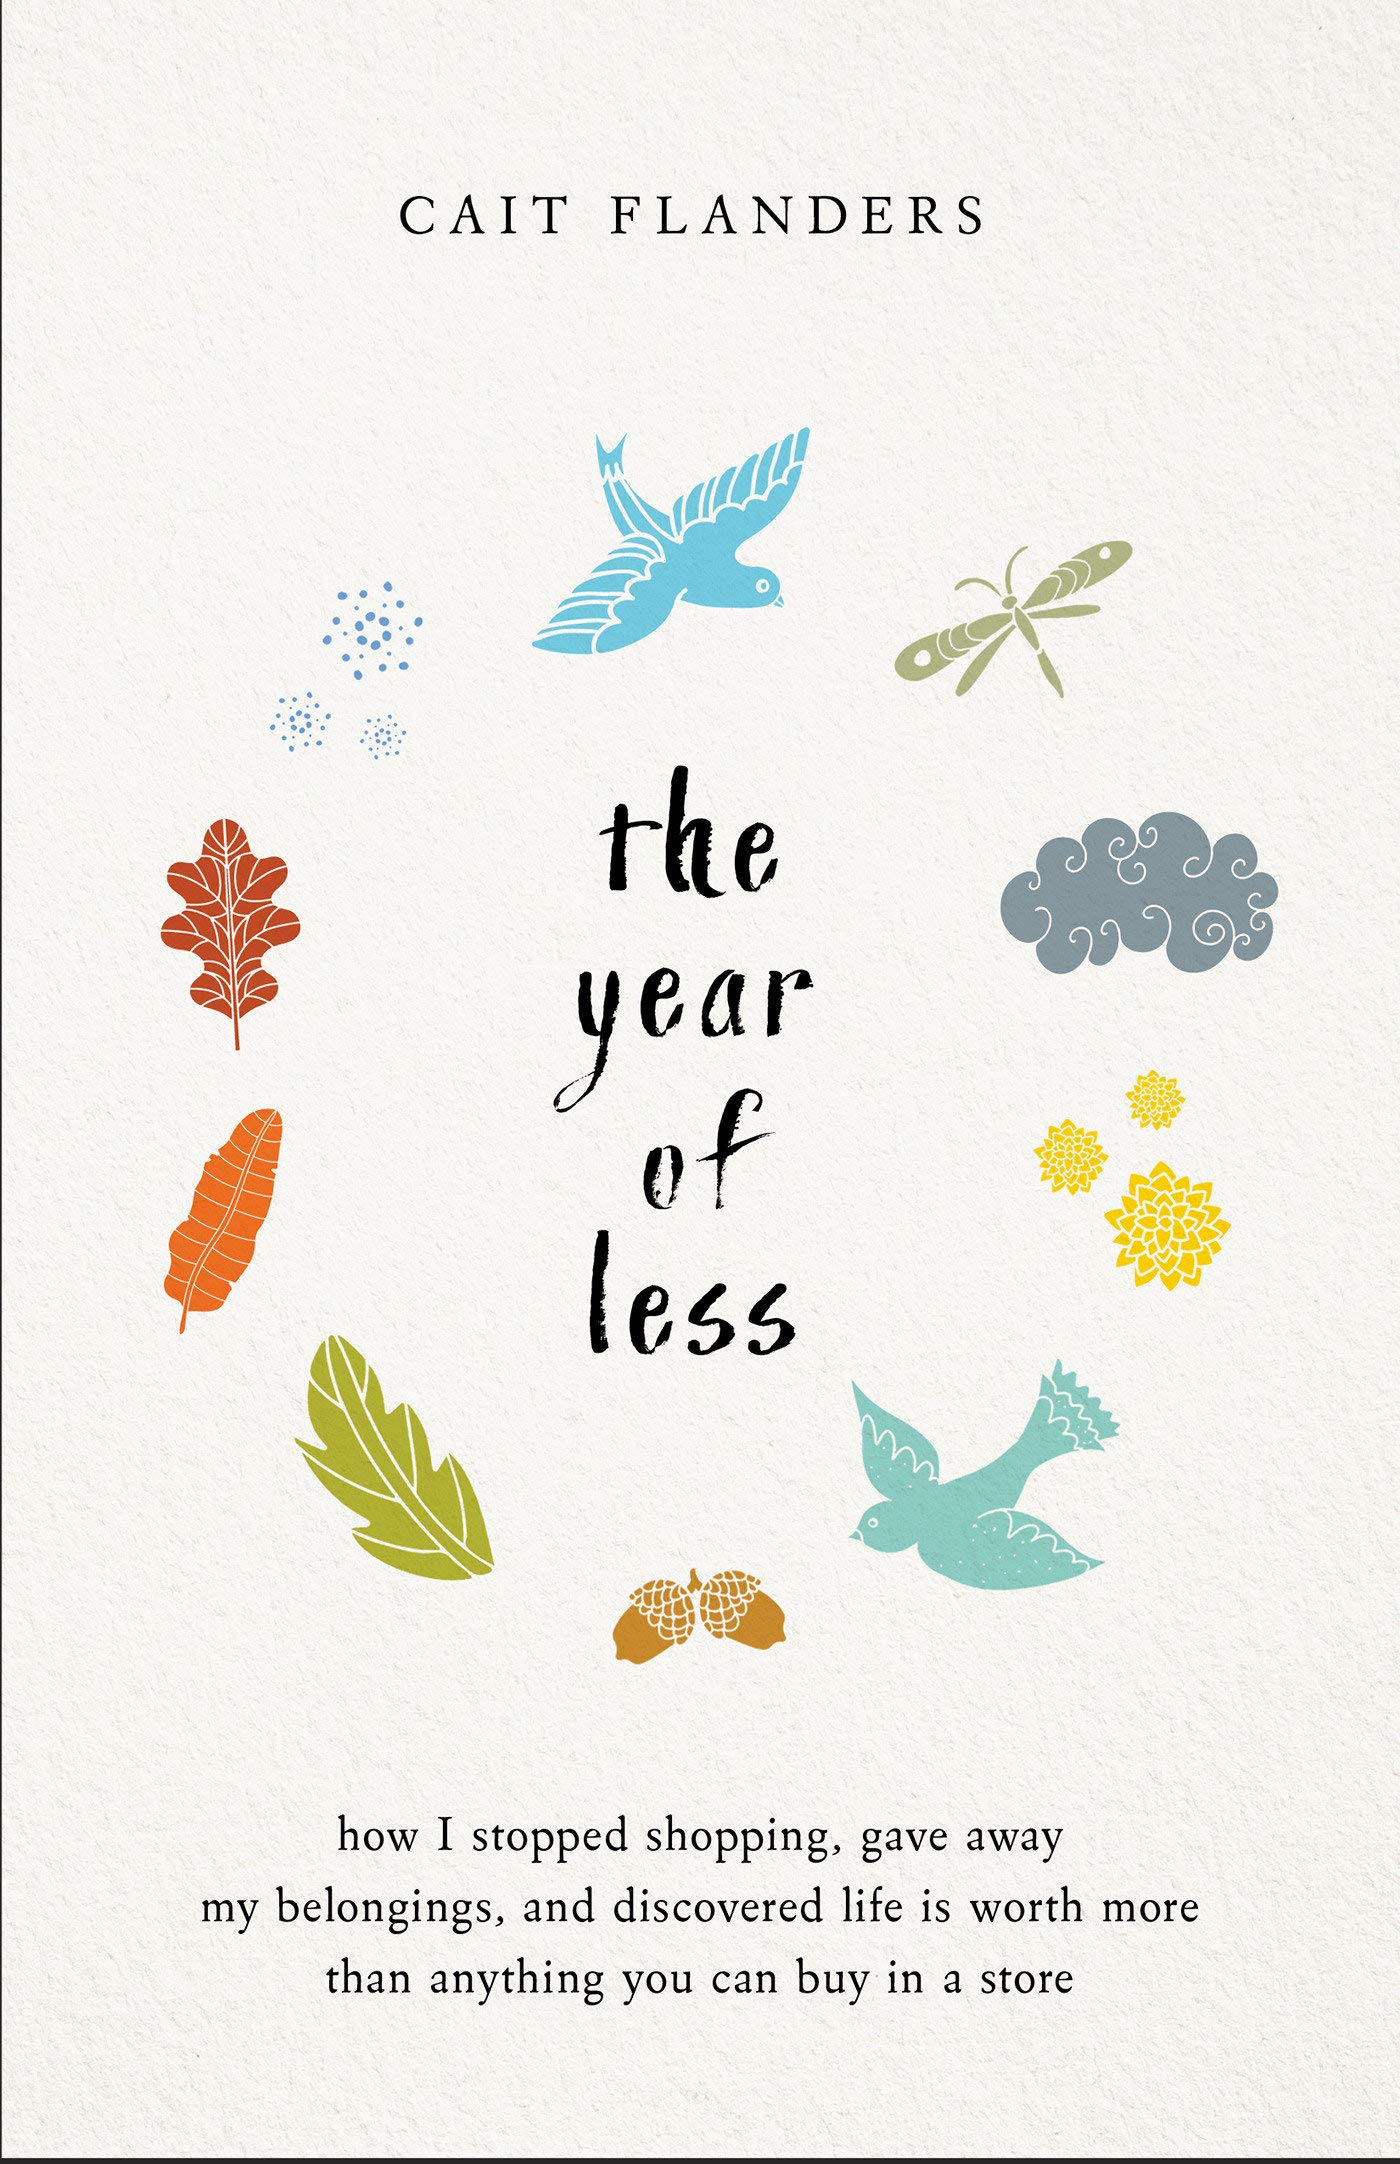 Cait Flanders: The year of less (2018)